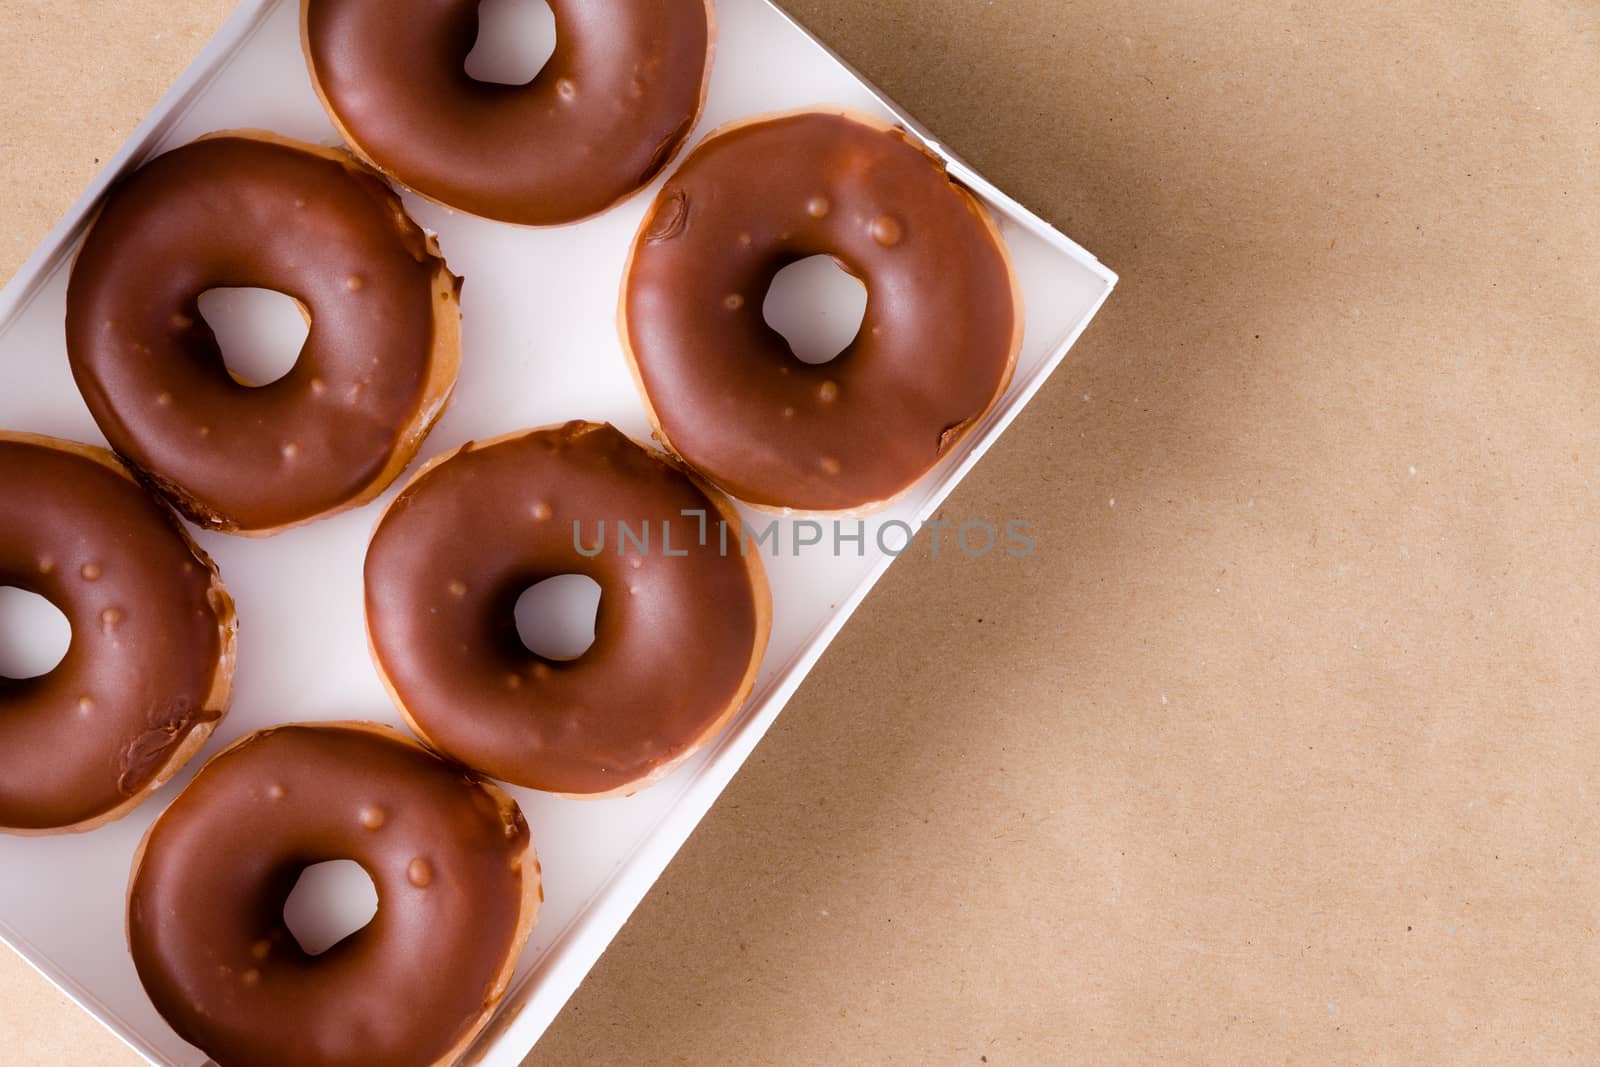 First person perspective top down view of six chocolate and cream donuts in open box over brown table with copy space